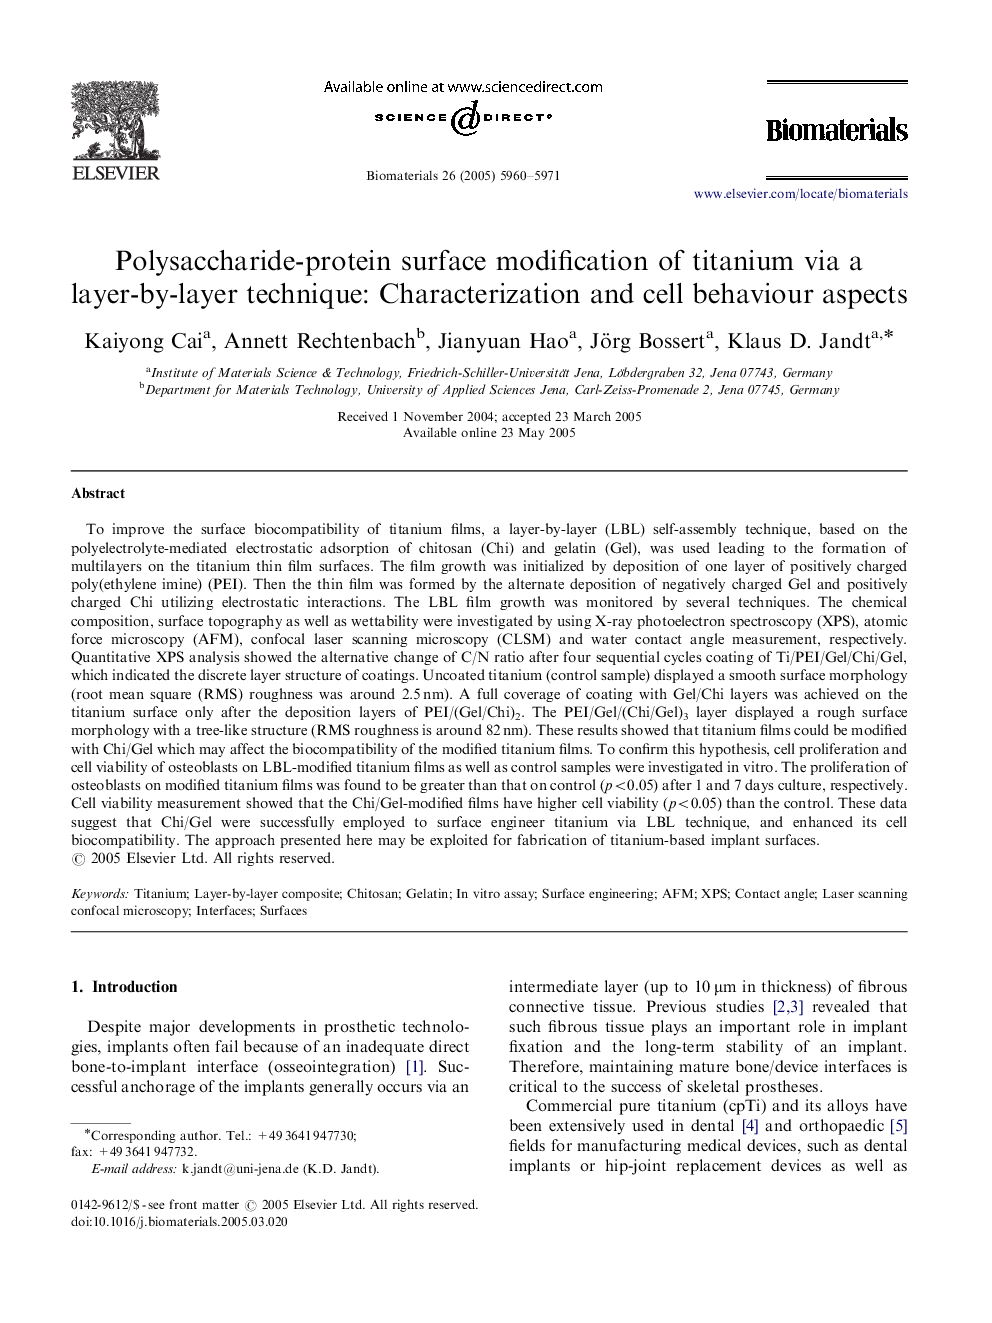 Polysaccharide-protein surface modification of titanium via a layer-by-layer technique: Characterization and cell behaviour aspects